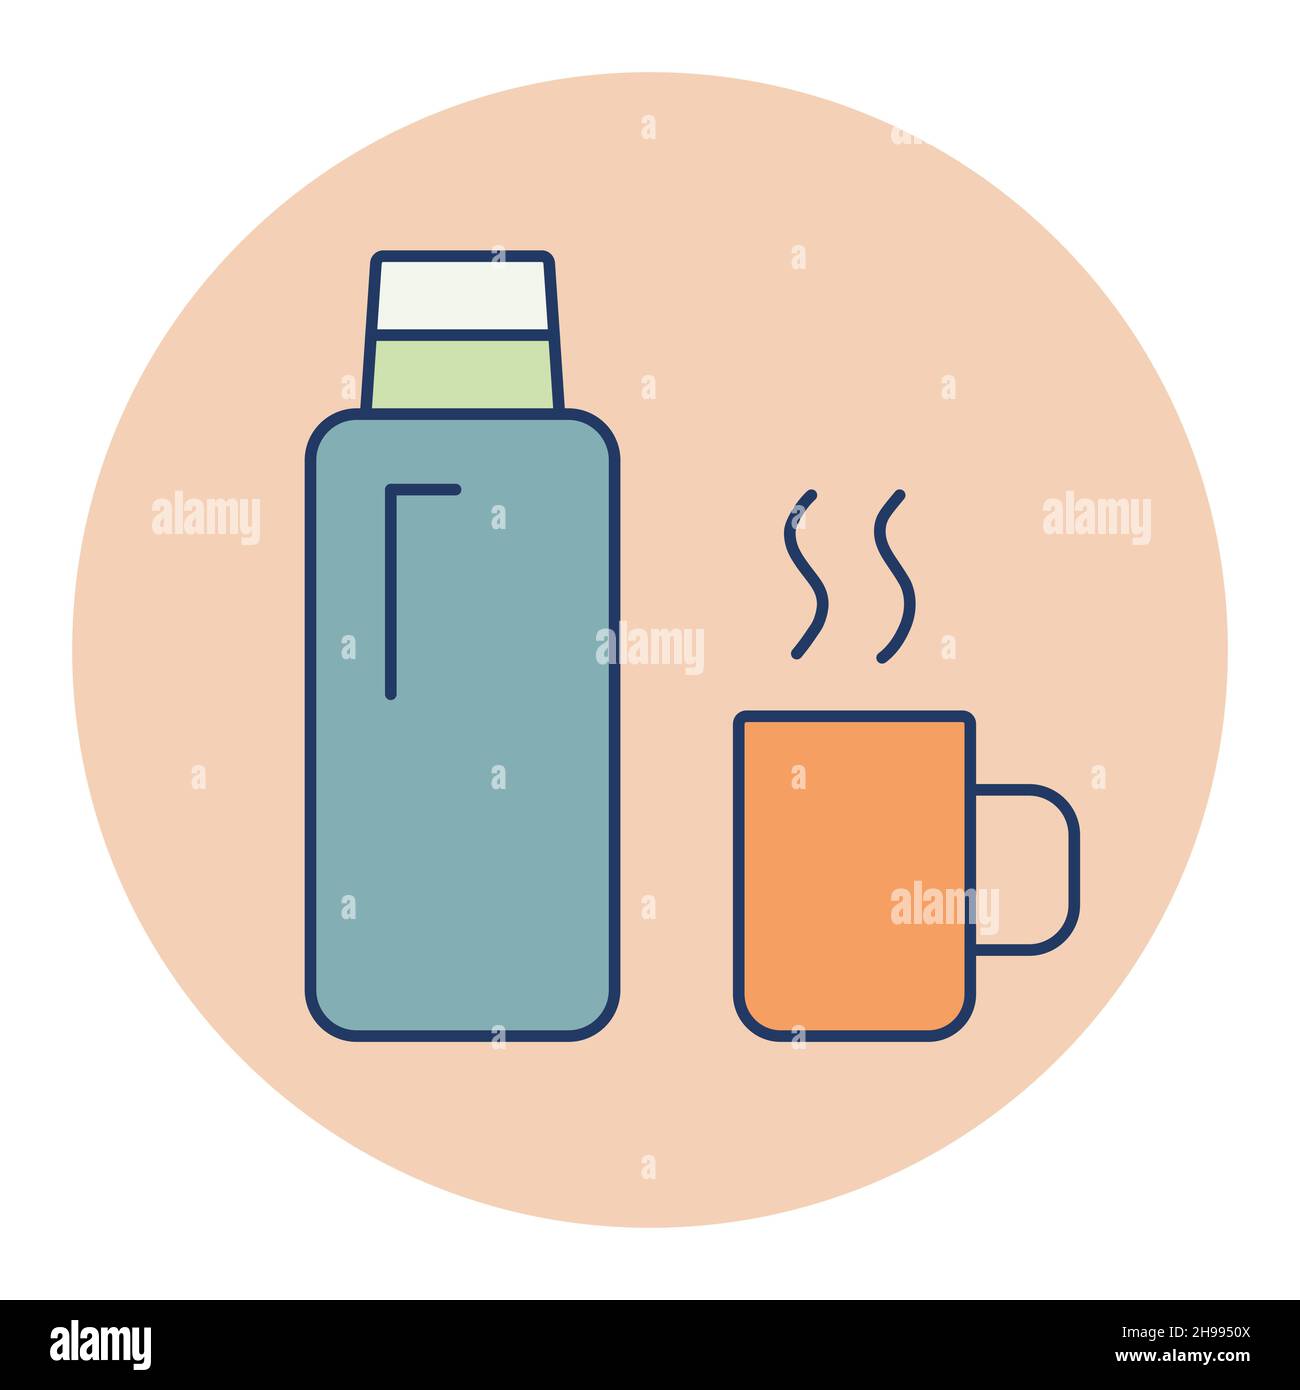 https://c8.alamy.com/comp/2H9950X/thermos-bottle-vector-isolated-icon-camping-and-hiking-sign-graph-symbol-for-travel-and-tourism-web-site-and-apps-design-logo-app-ui-2H9950X.jpg